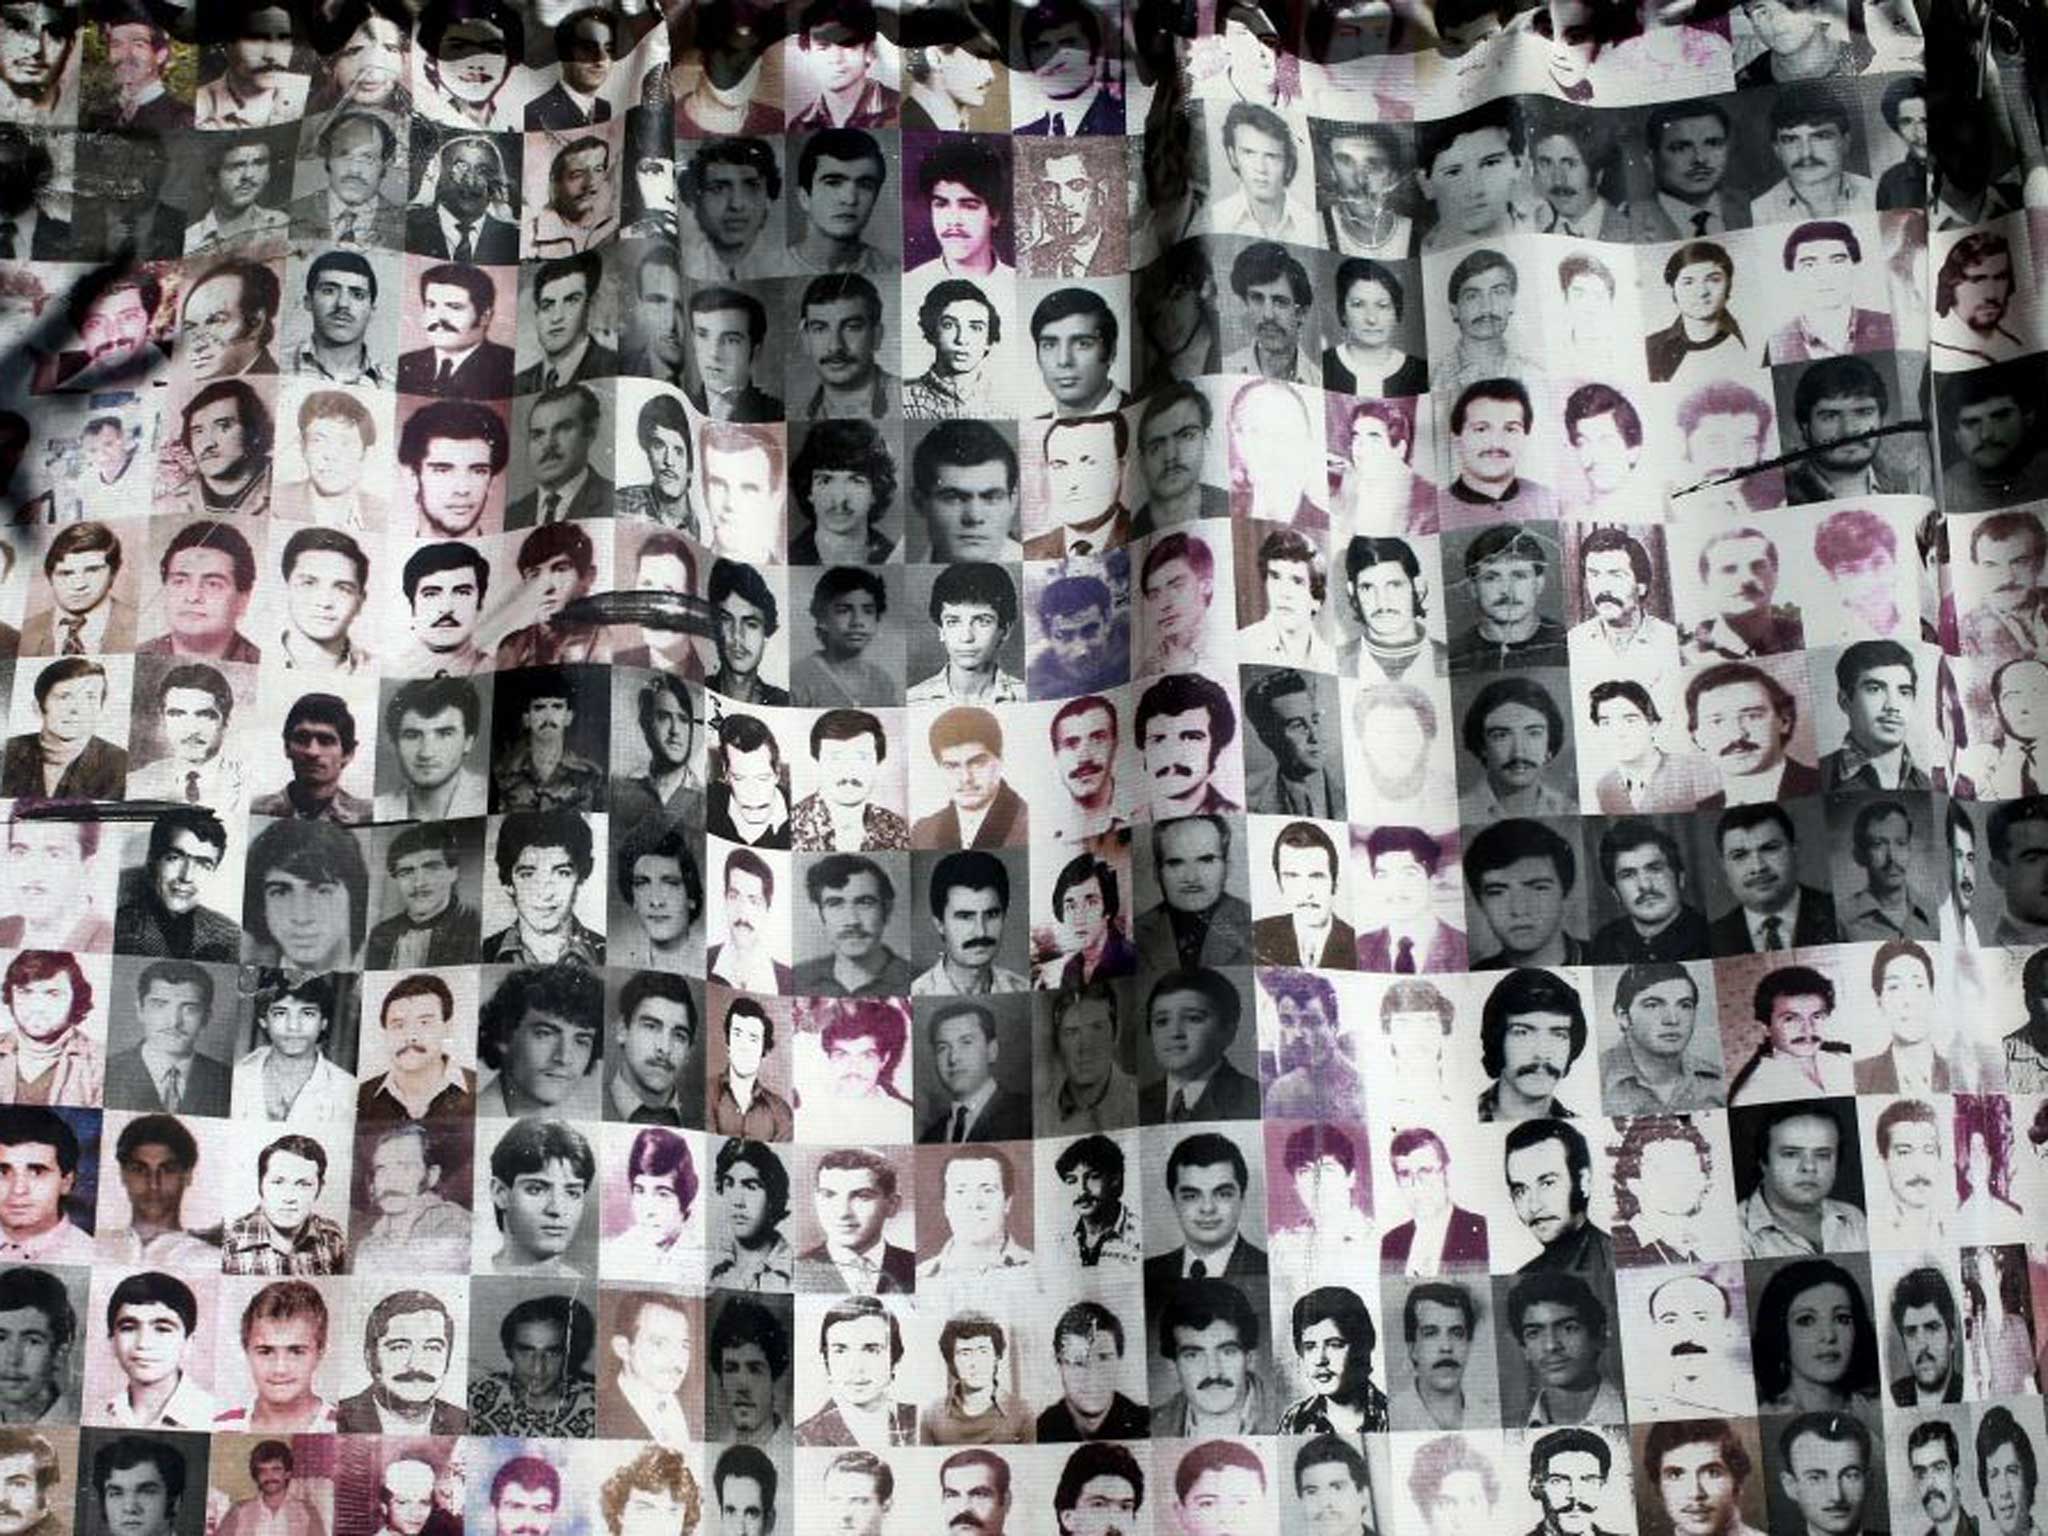 Fading Faces: Portraits of some of the thousands who have gone missing in Lebanon